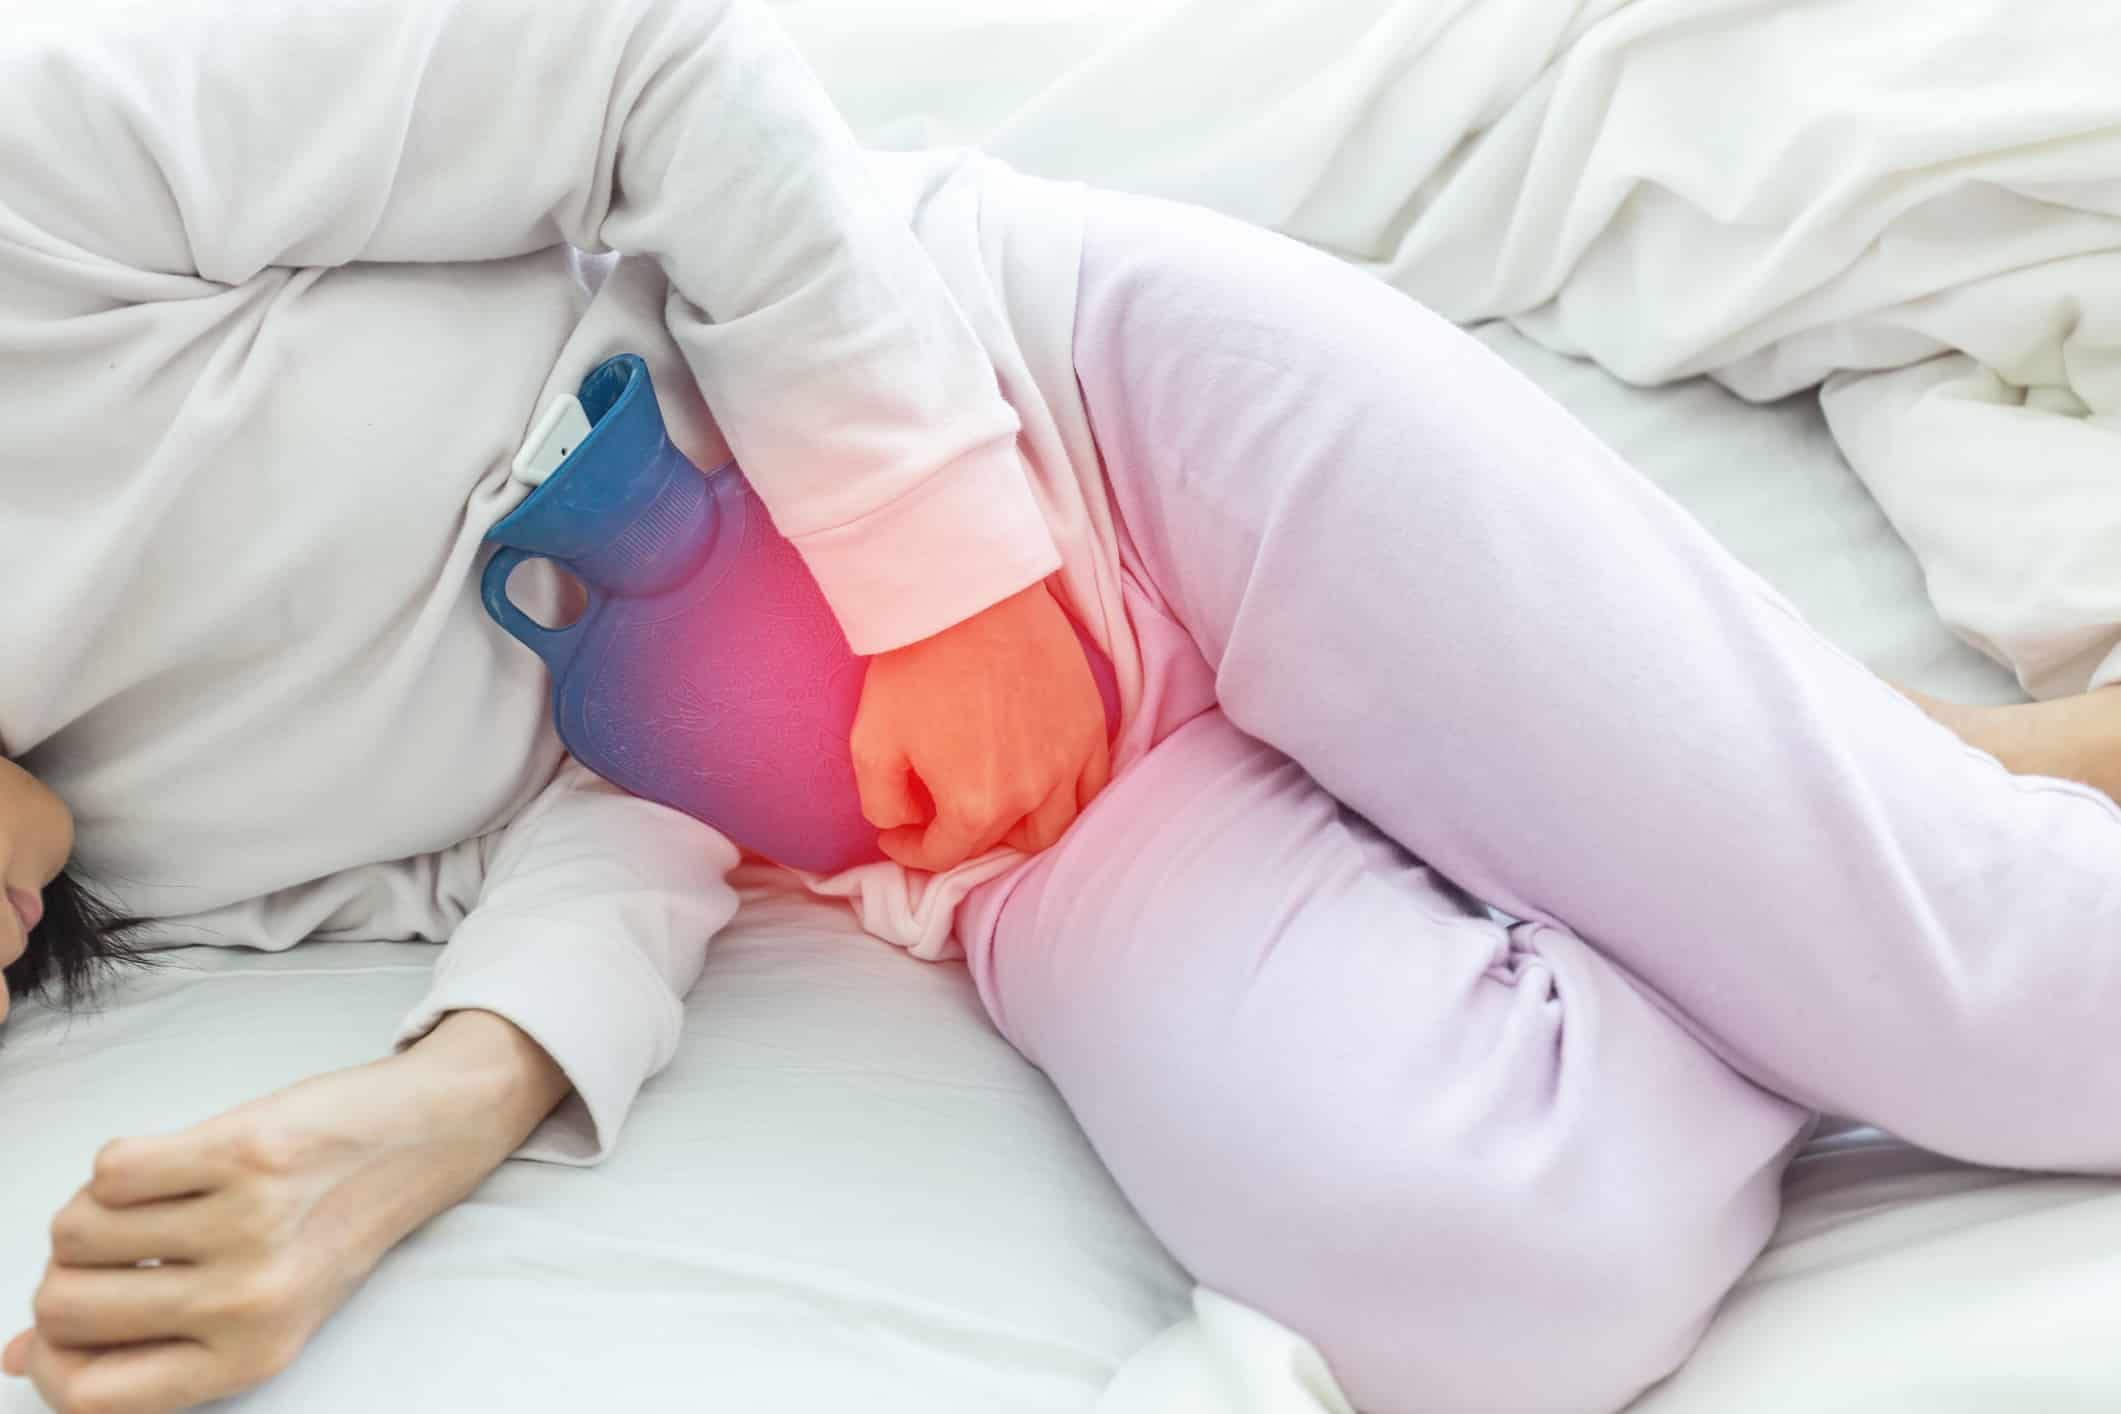 Woman have bladder pain sitting on bed in bedroom after wake up feeling so sick and painful,Healthcare concept